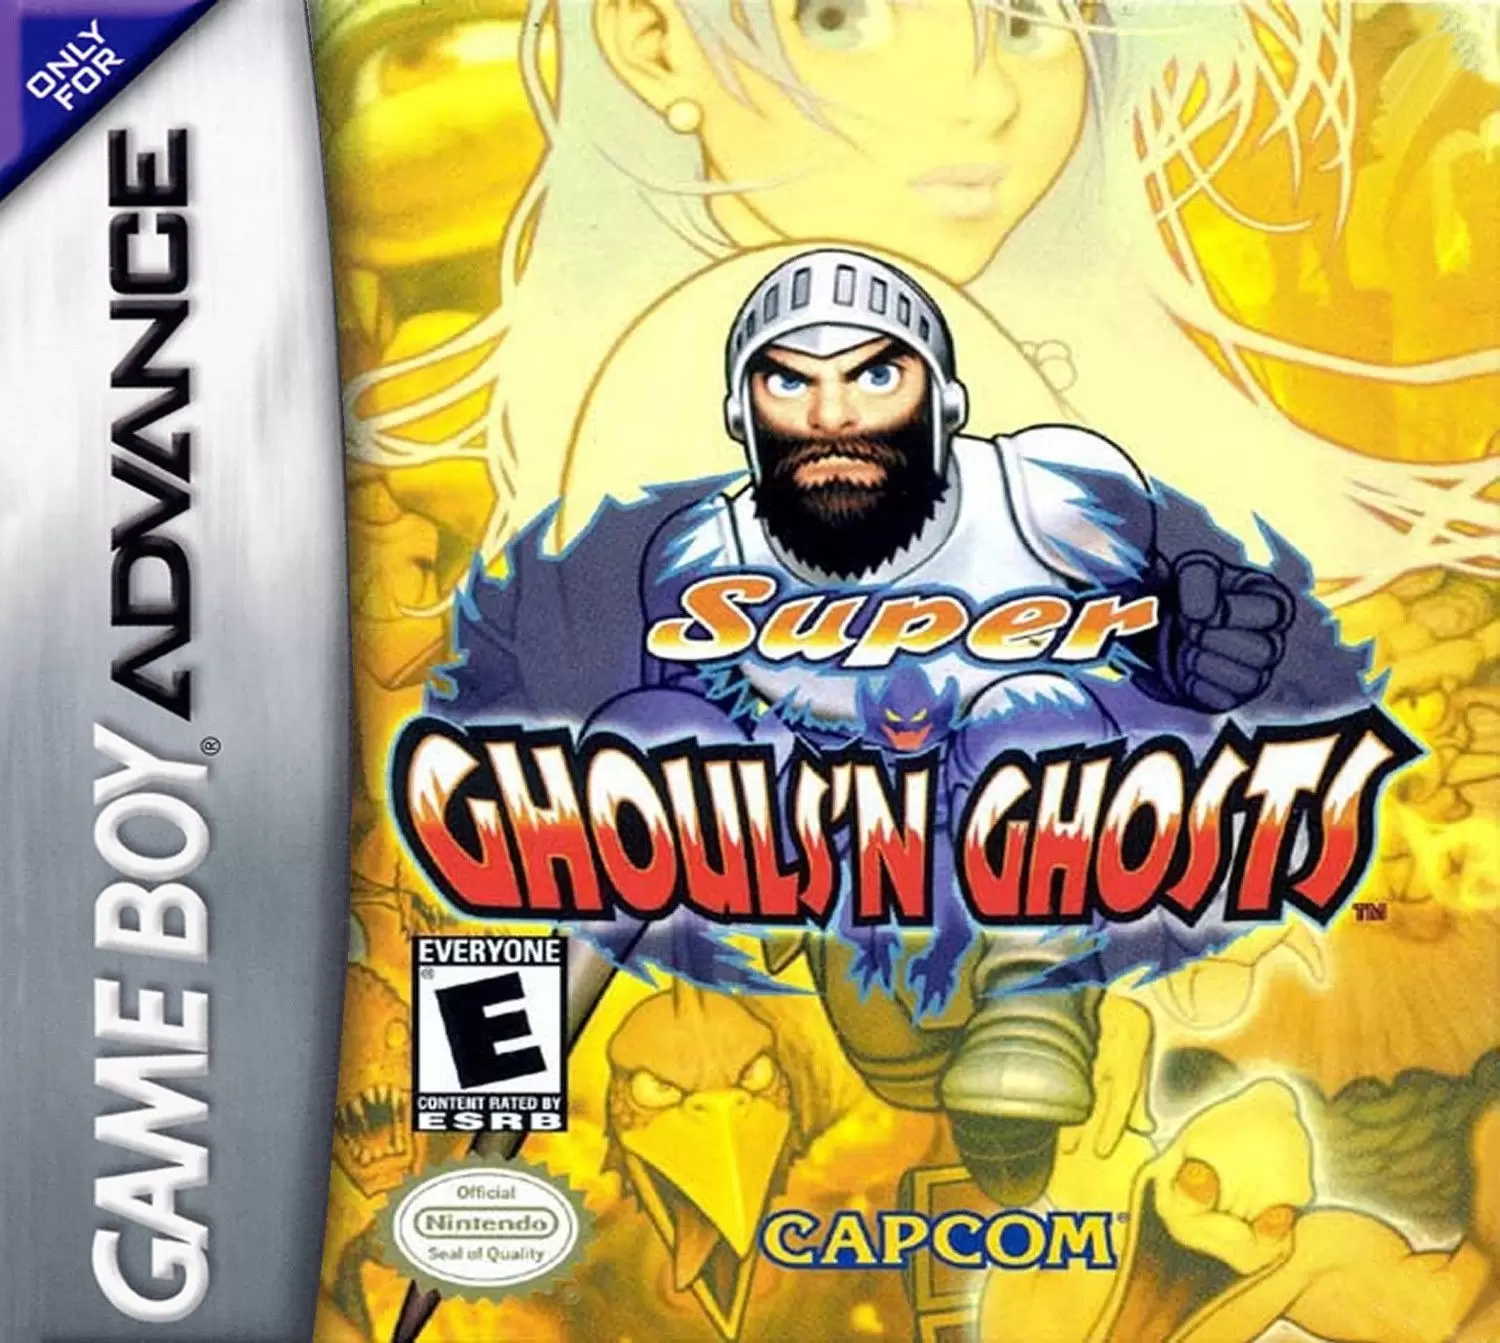 Game Boy Advance Games - Super Ghouls \'n Ghosts